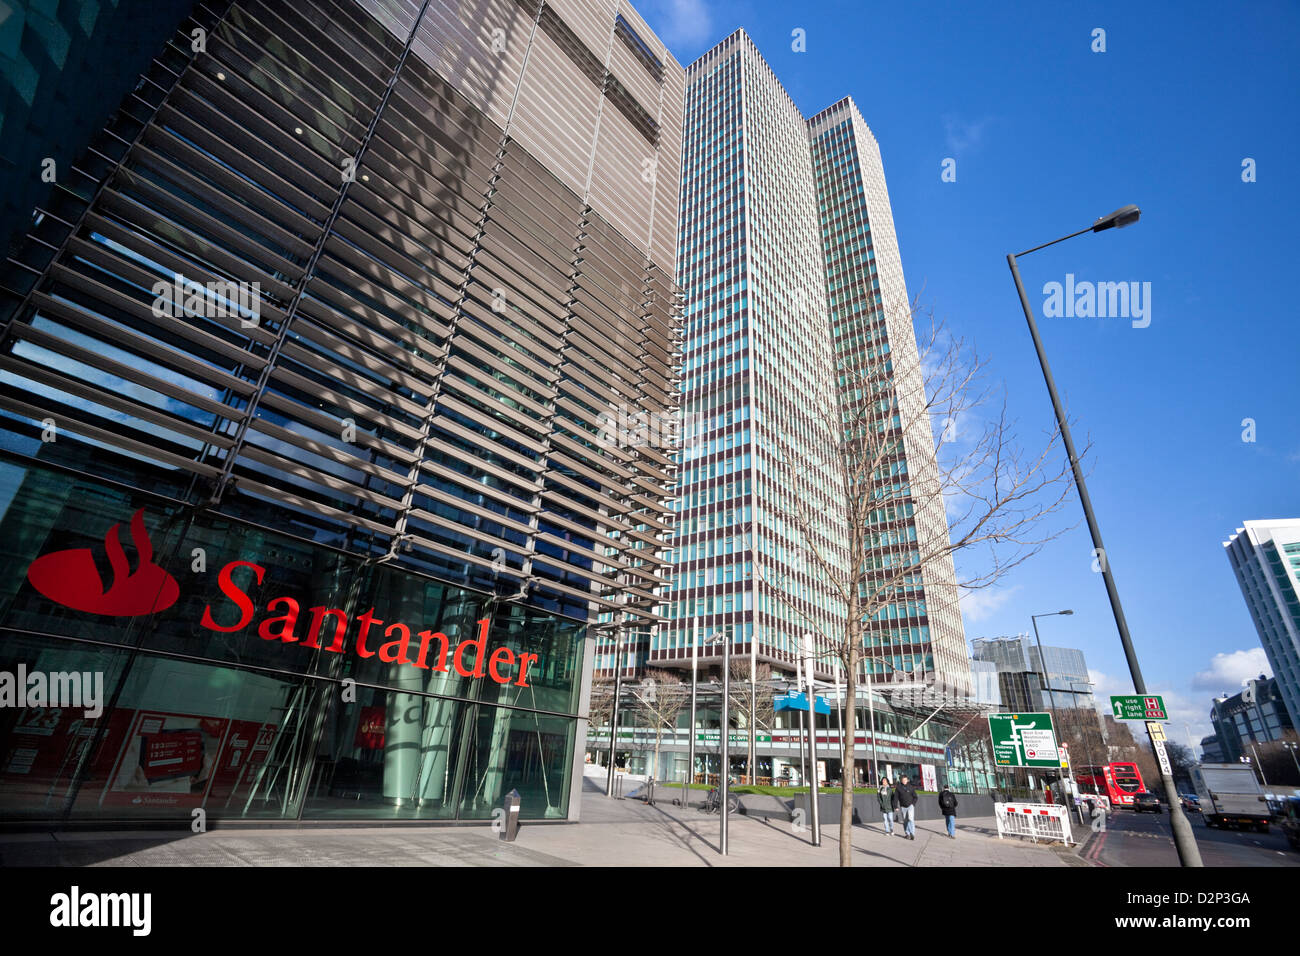 Banco Santander at Regent's Place with the Euston Tower skyscraper in the background, Euston Road, London Borough of Camden, England, UK. Stock Photo